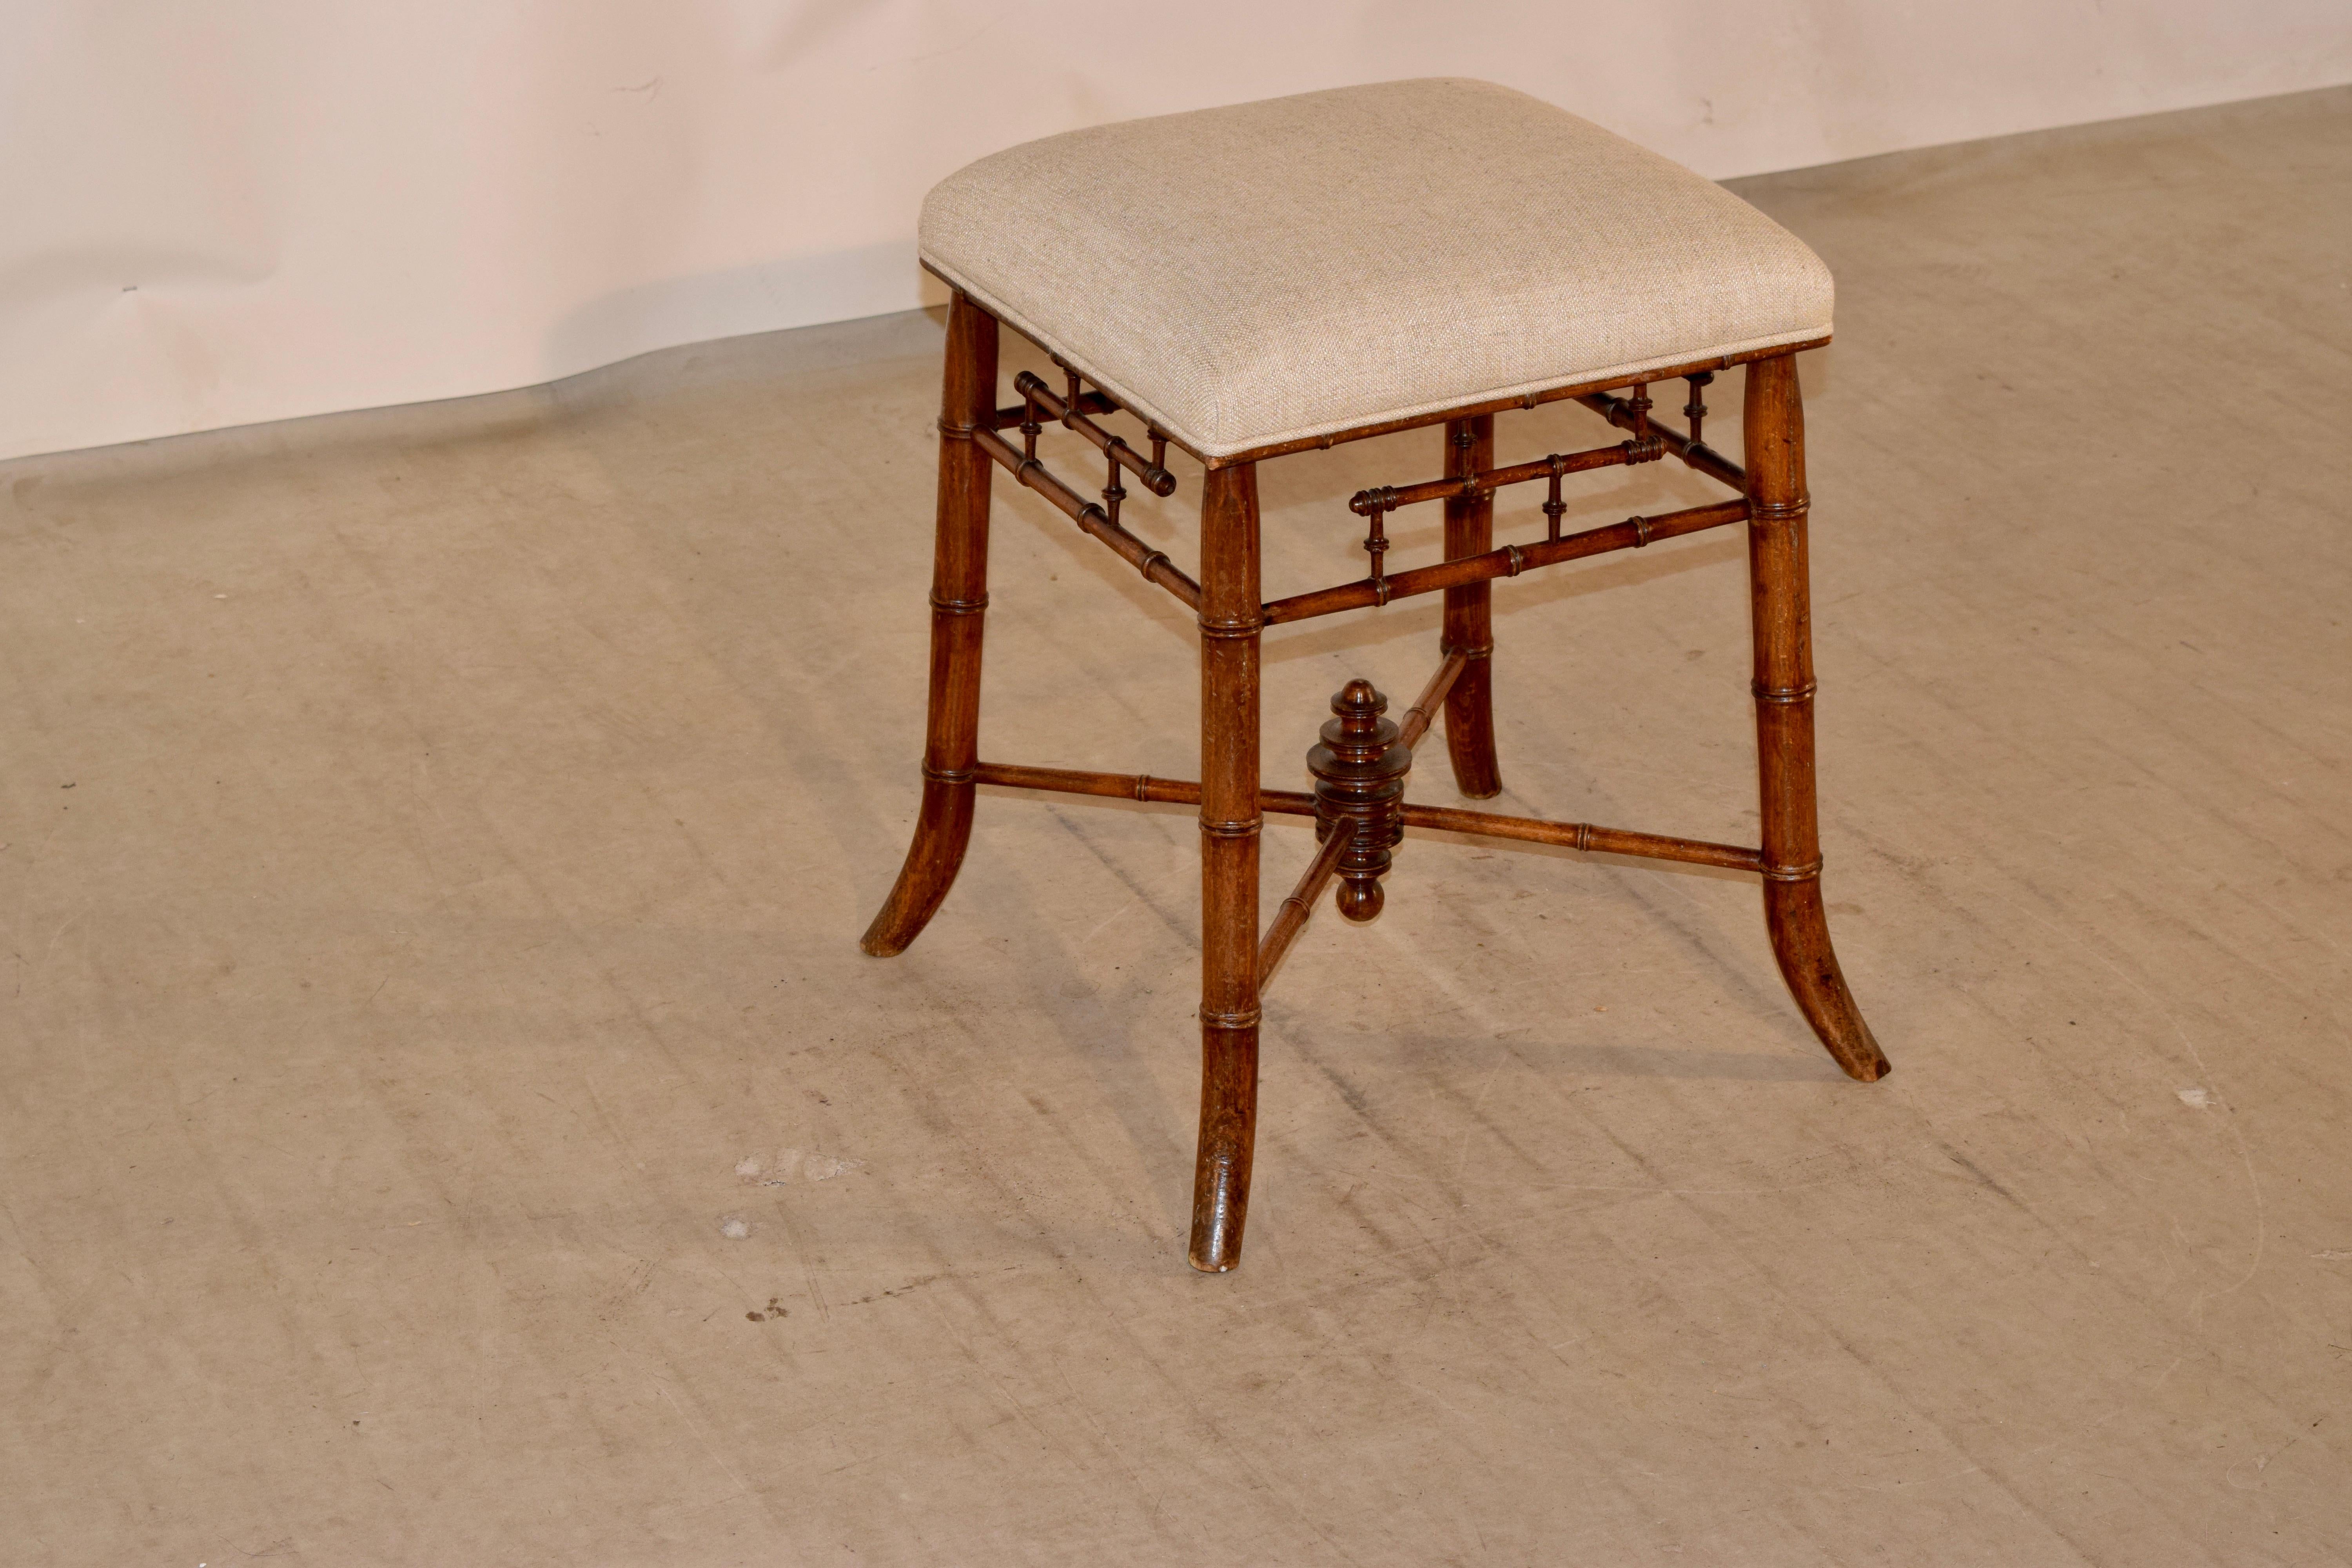 19th century French stool made from cherry. The seat has been newly upholstered in linen and is supported on a solid cherry frame with hand-turned faux bamboo legs, stretchers, and apron design. The legs are splayed for a graceful design.